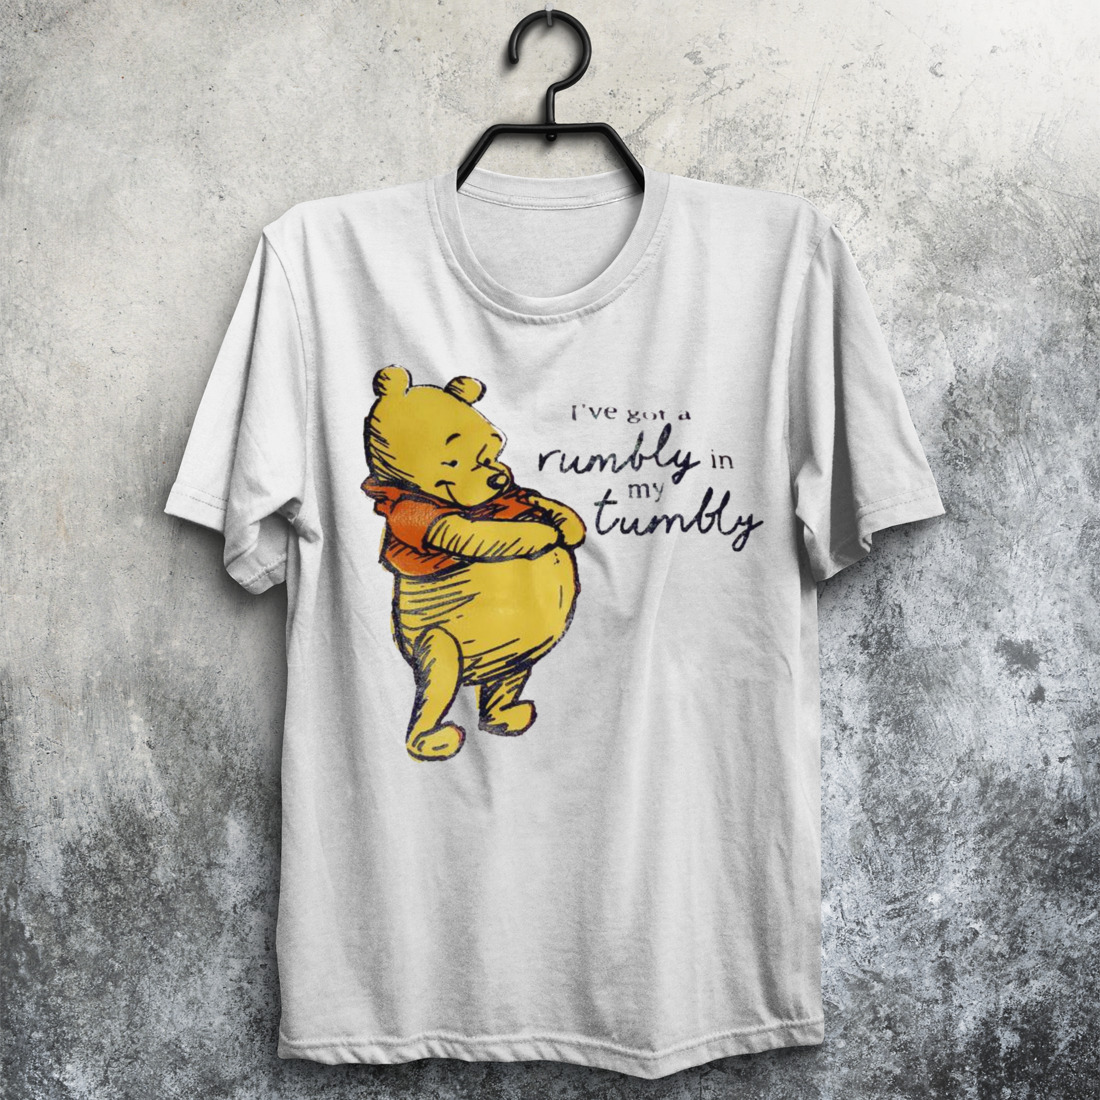 Winnie-the-Pooh i’ve got a rumbly in my tumbly shirt